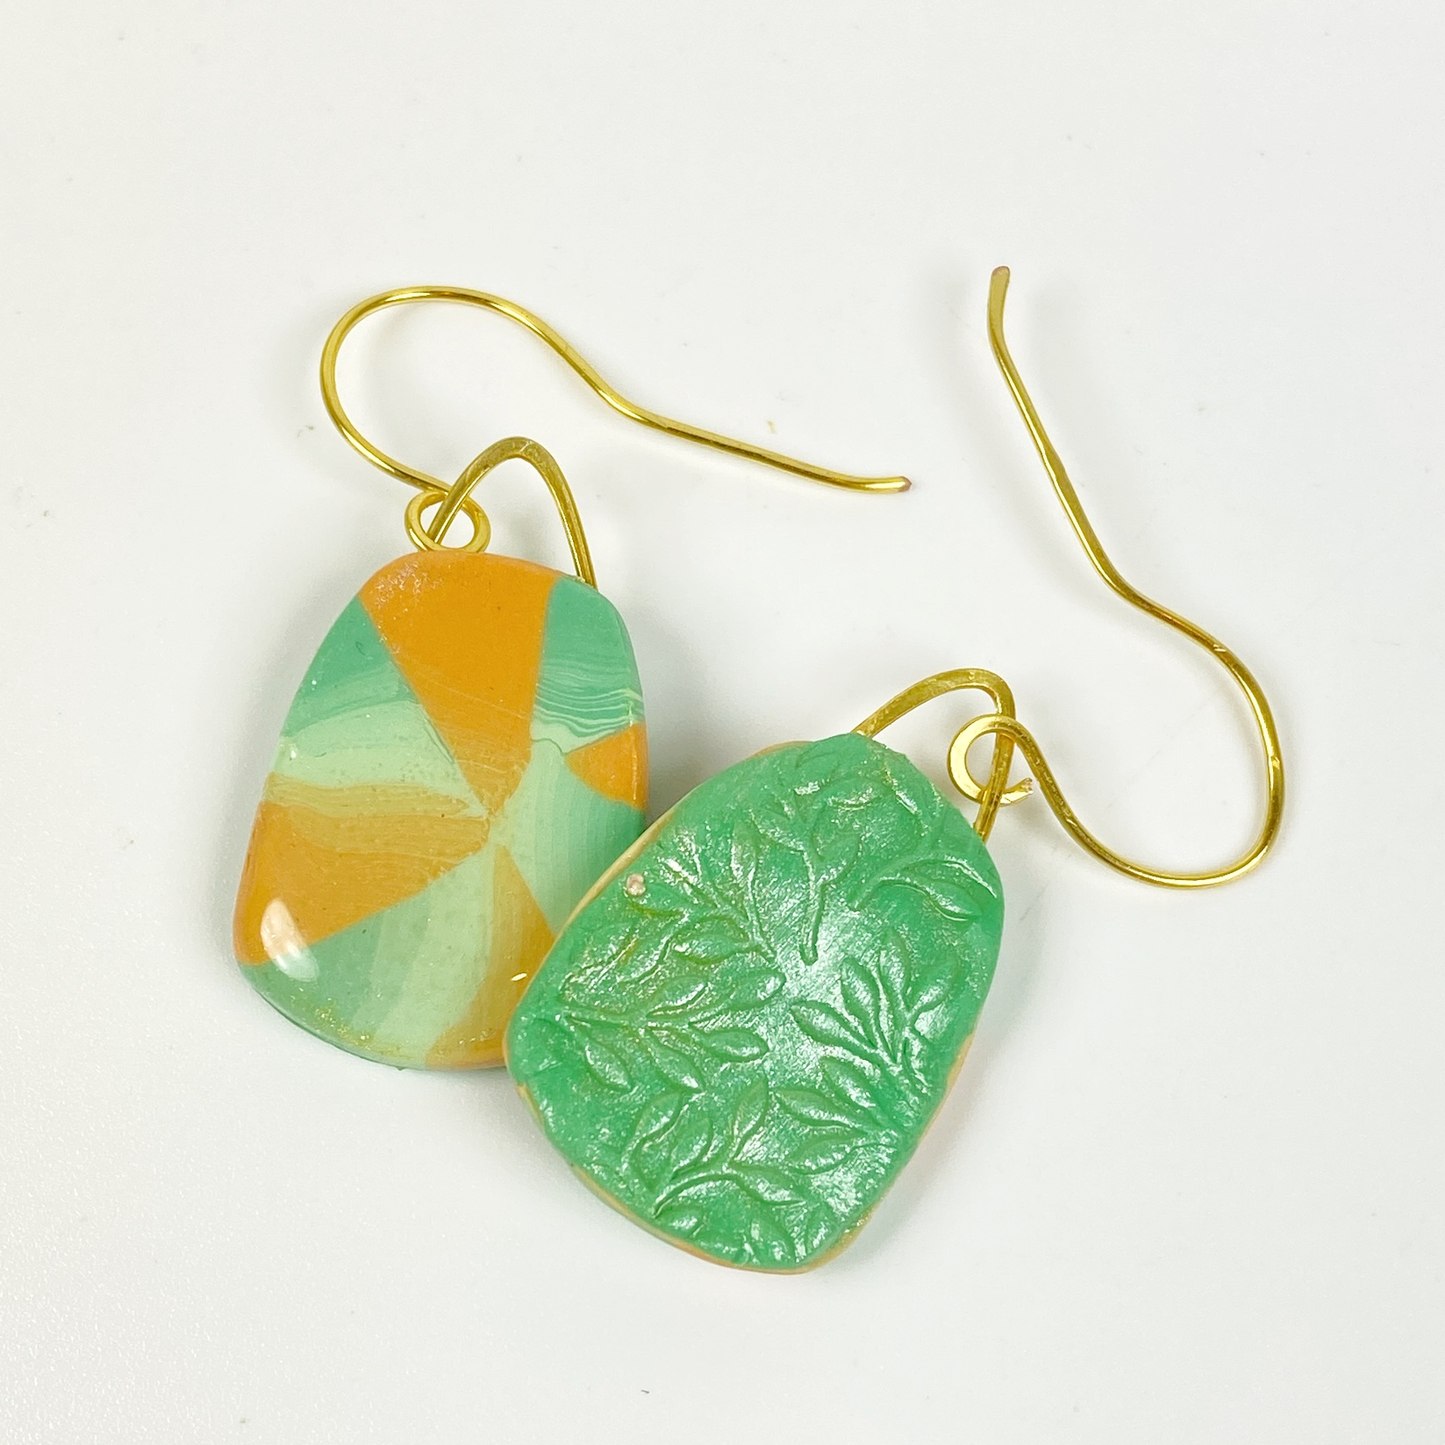 Desert Trapezoid Handmade Polymer Clay Earrings showing the green embossed back side of the earring